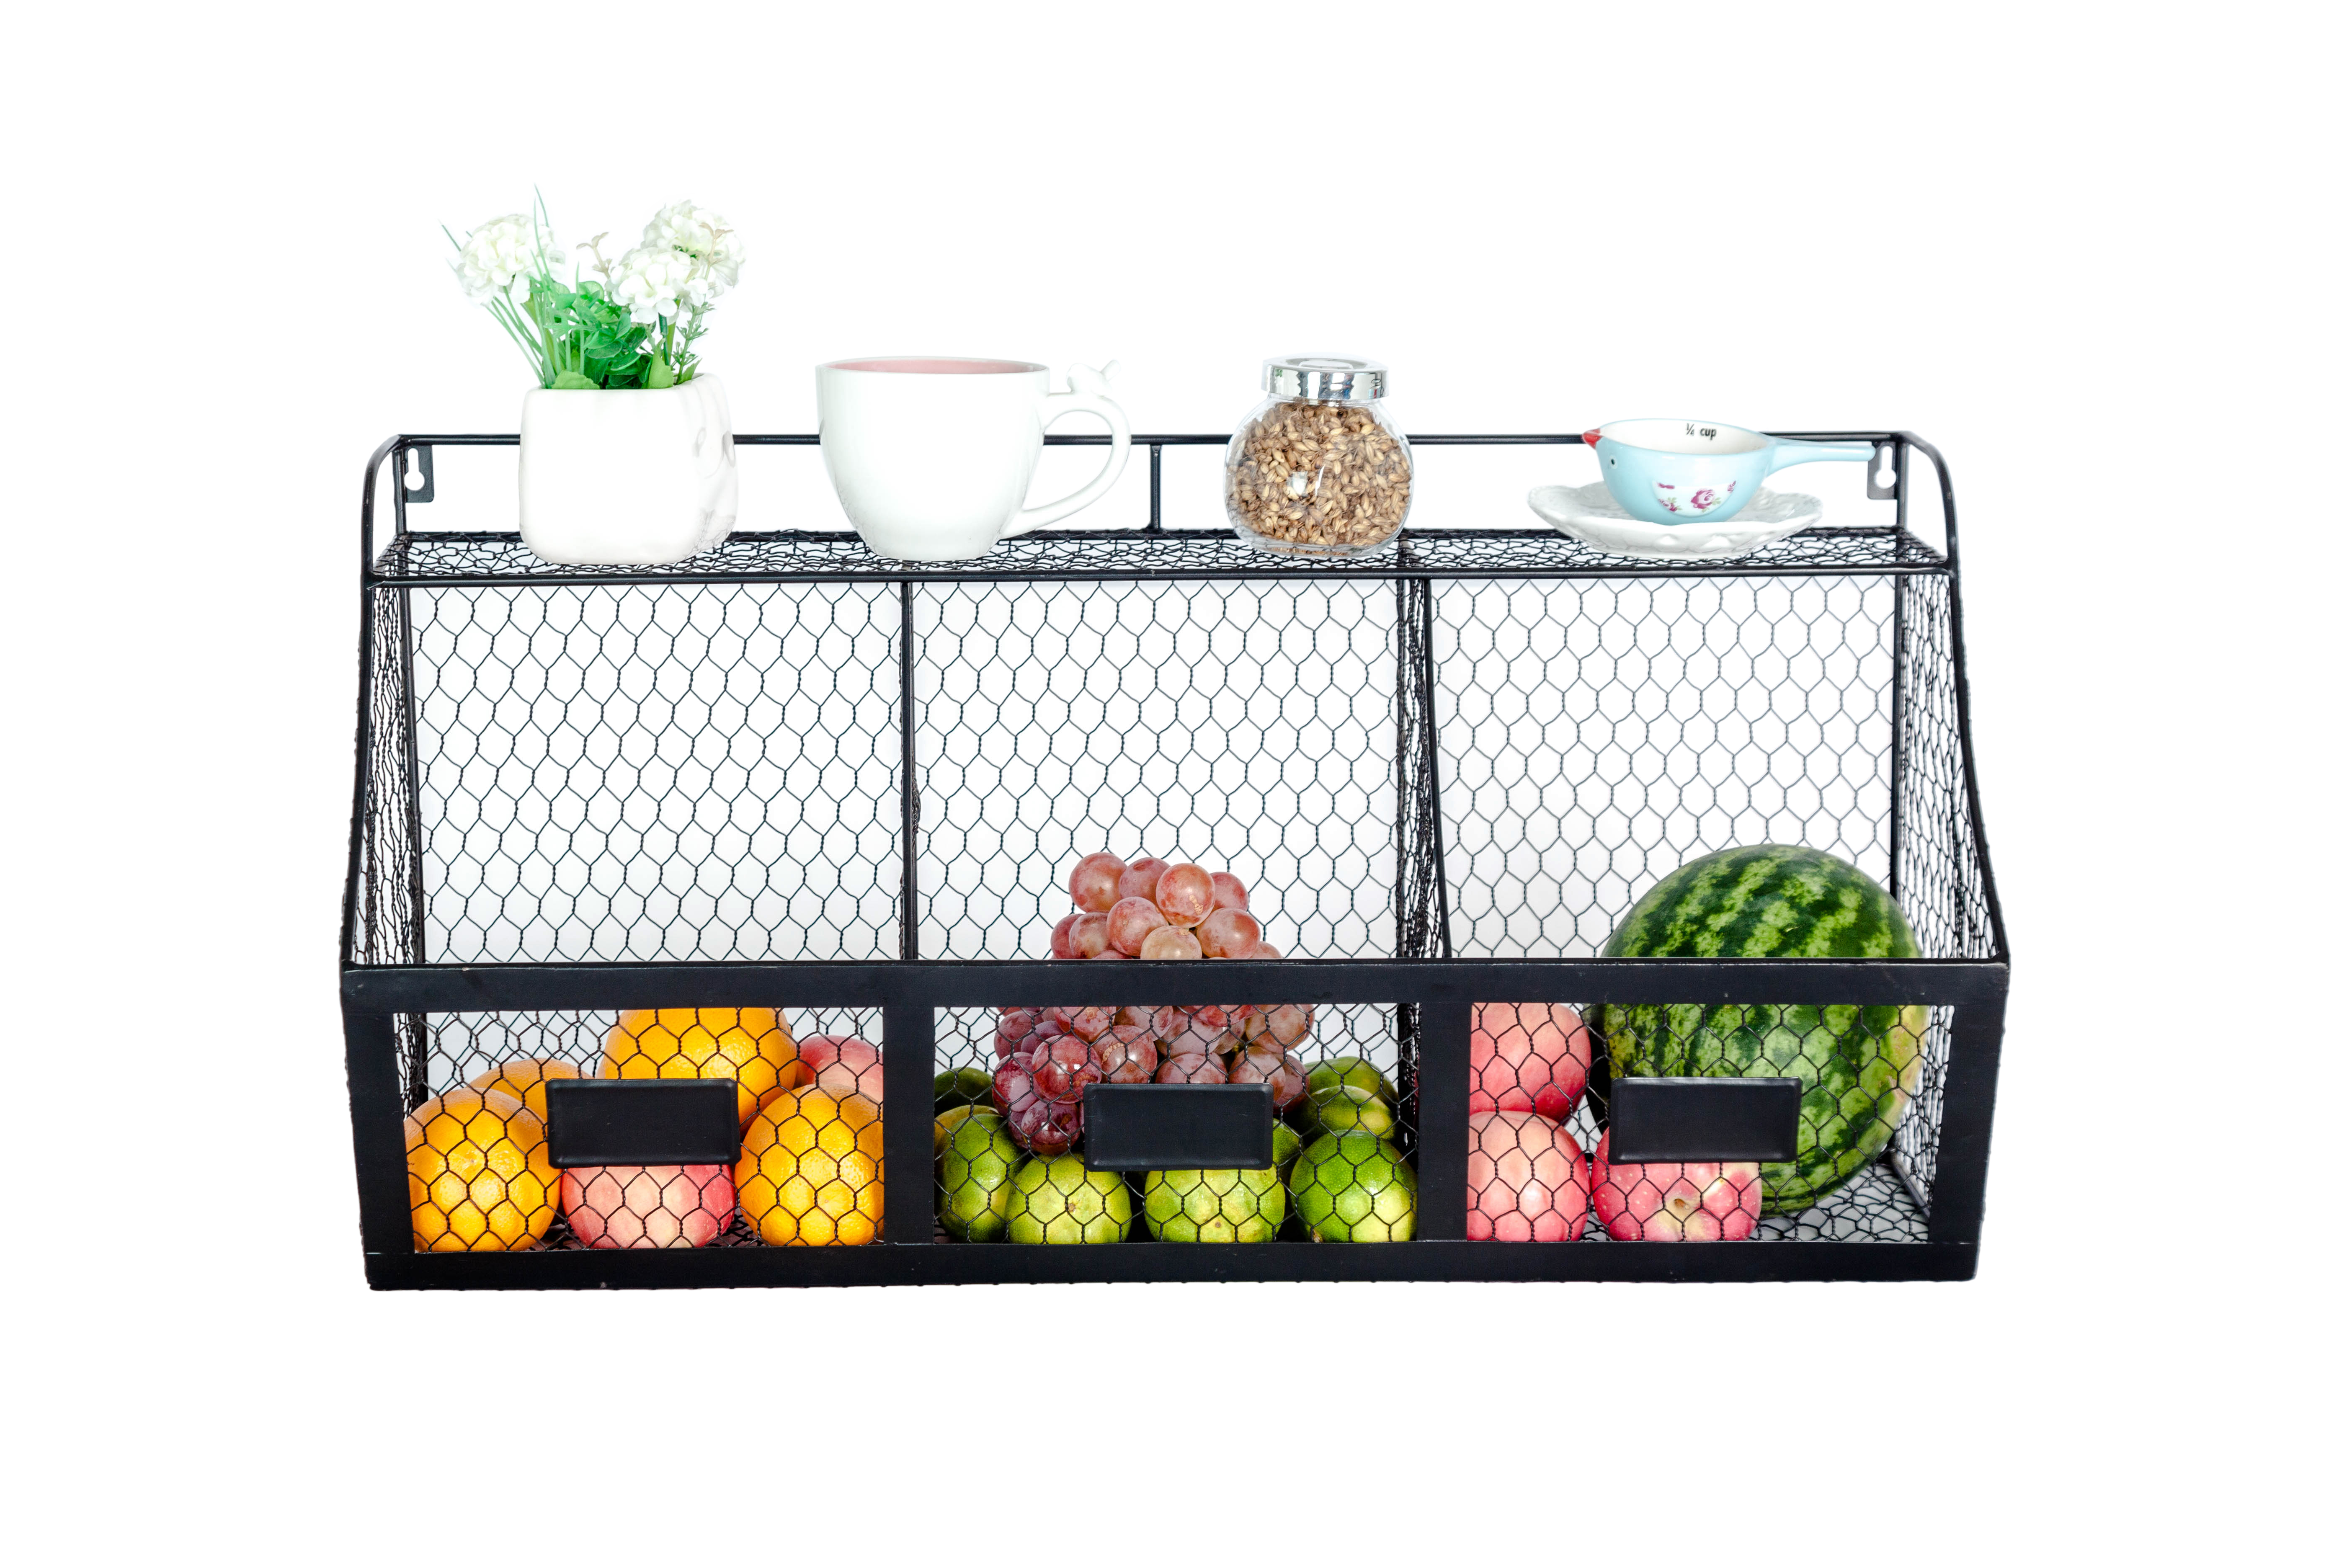 K-Cliffs 3 Compartment Basket, Large Wall Mount Metal Storage Hanging Fruit Organizer  Wire Baskets  Black Dimensions; 26x13x10 - image 1 of 5